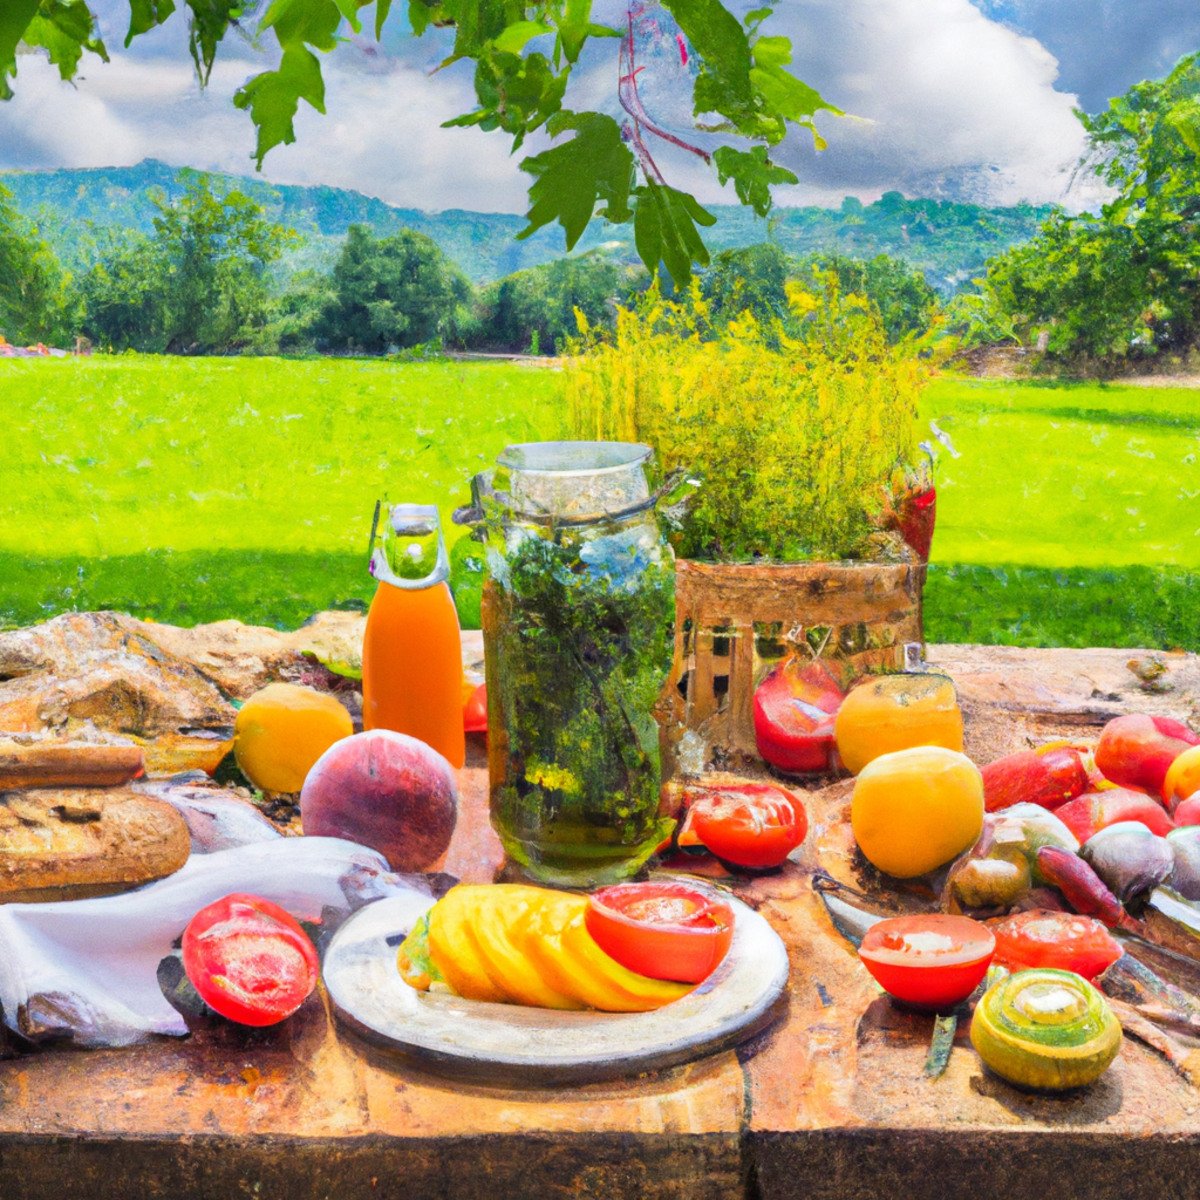 The photo captures a rustic wooden table adorned with an array of colorful fruits and vegetables, including ripe red tomatoes, vibrant green kale, and juicy yellow peaches. A basket of freshly baked whole grain bread sits in the center, surrounded by jars of homemade preserves and a pitcher of ice-cold lemonade. In the background, a lush green field stretches out, hinting at the source of these wholesome, farm-fresh ingredients. The image exudes a sense of health and vitality, inviting readers to indulge in the nourishing foods that will power their workouts and fuel their bodies.